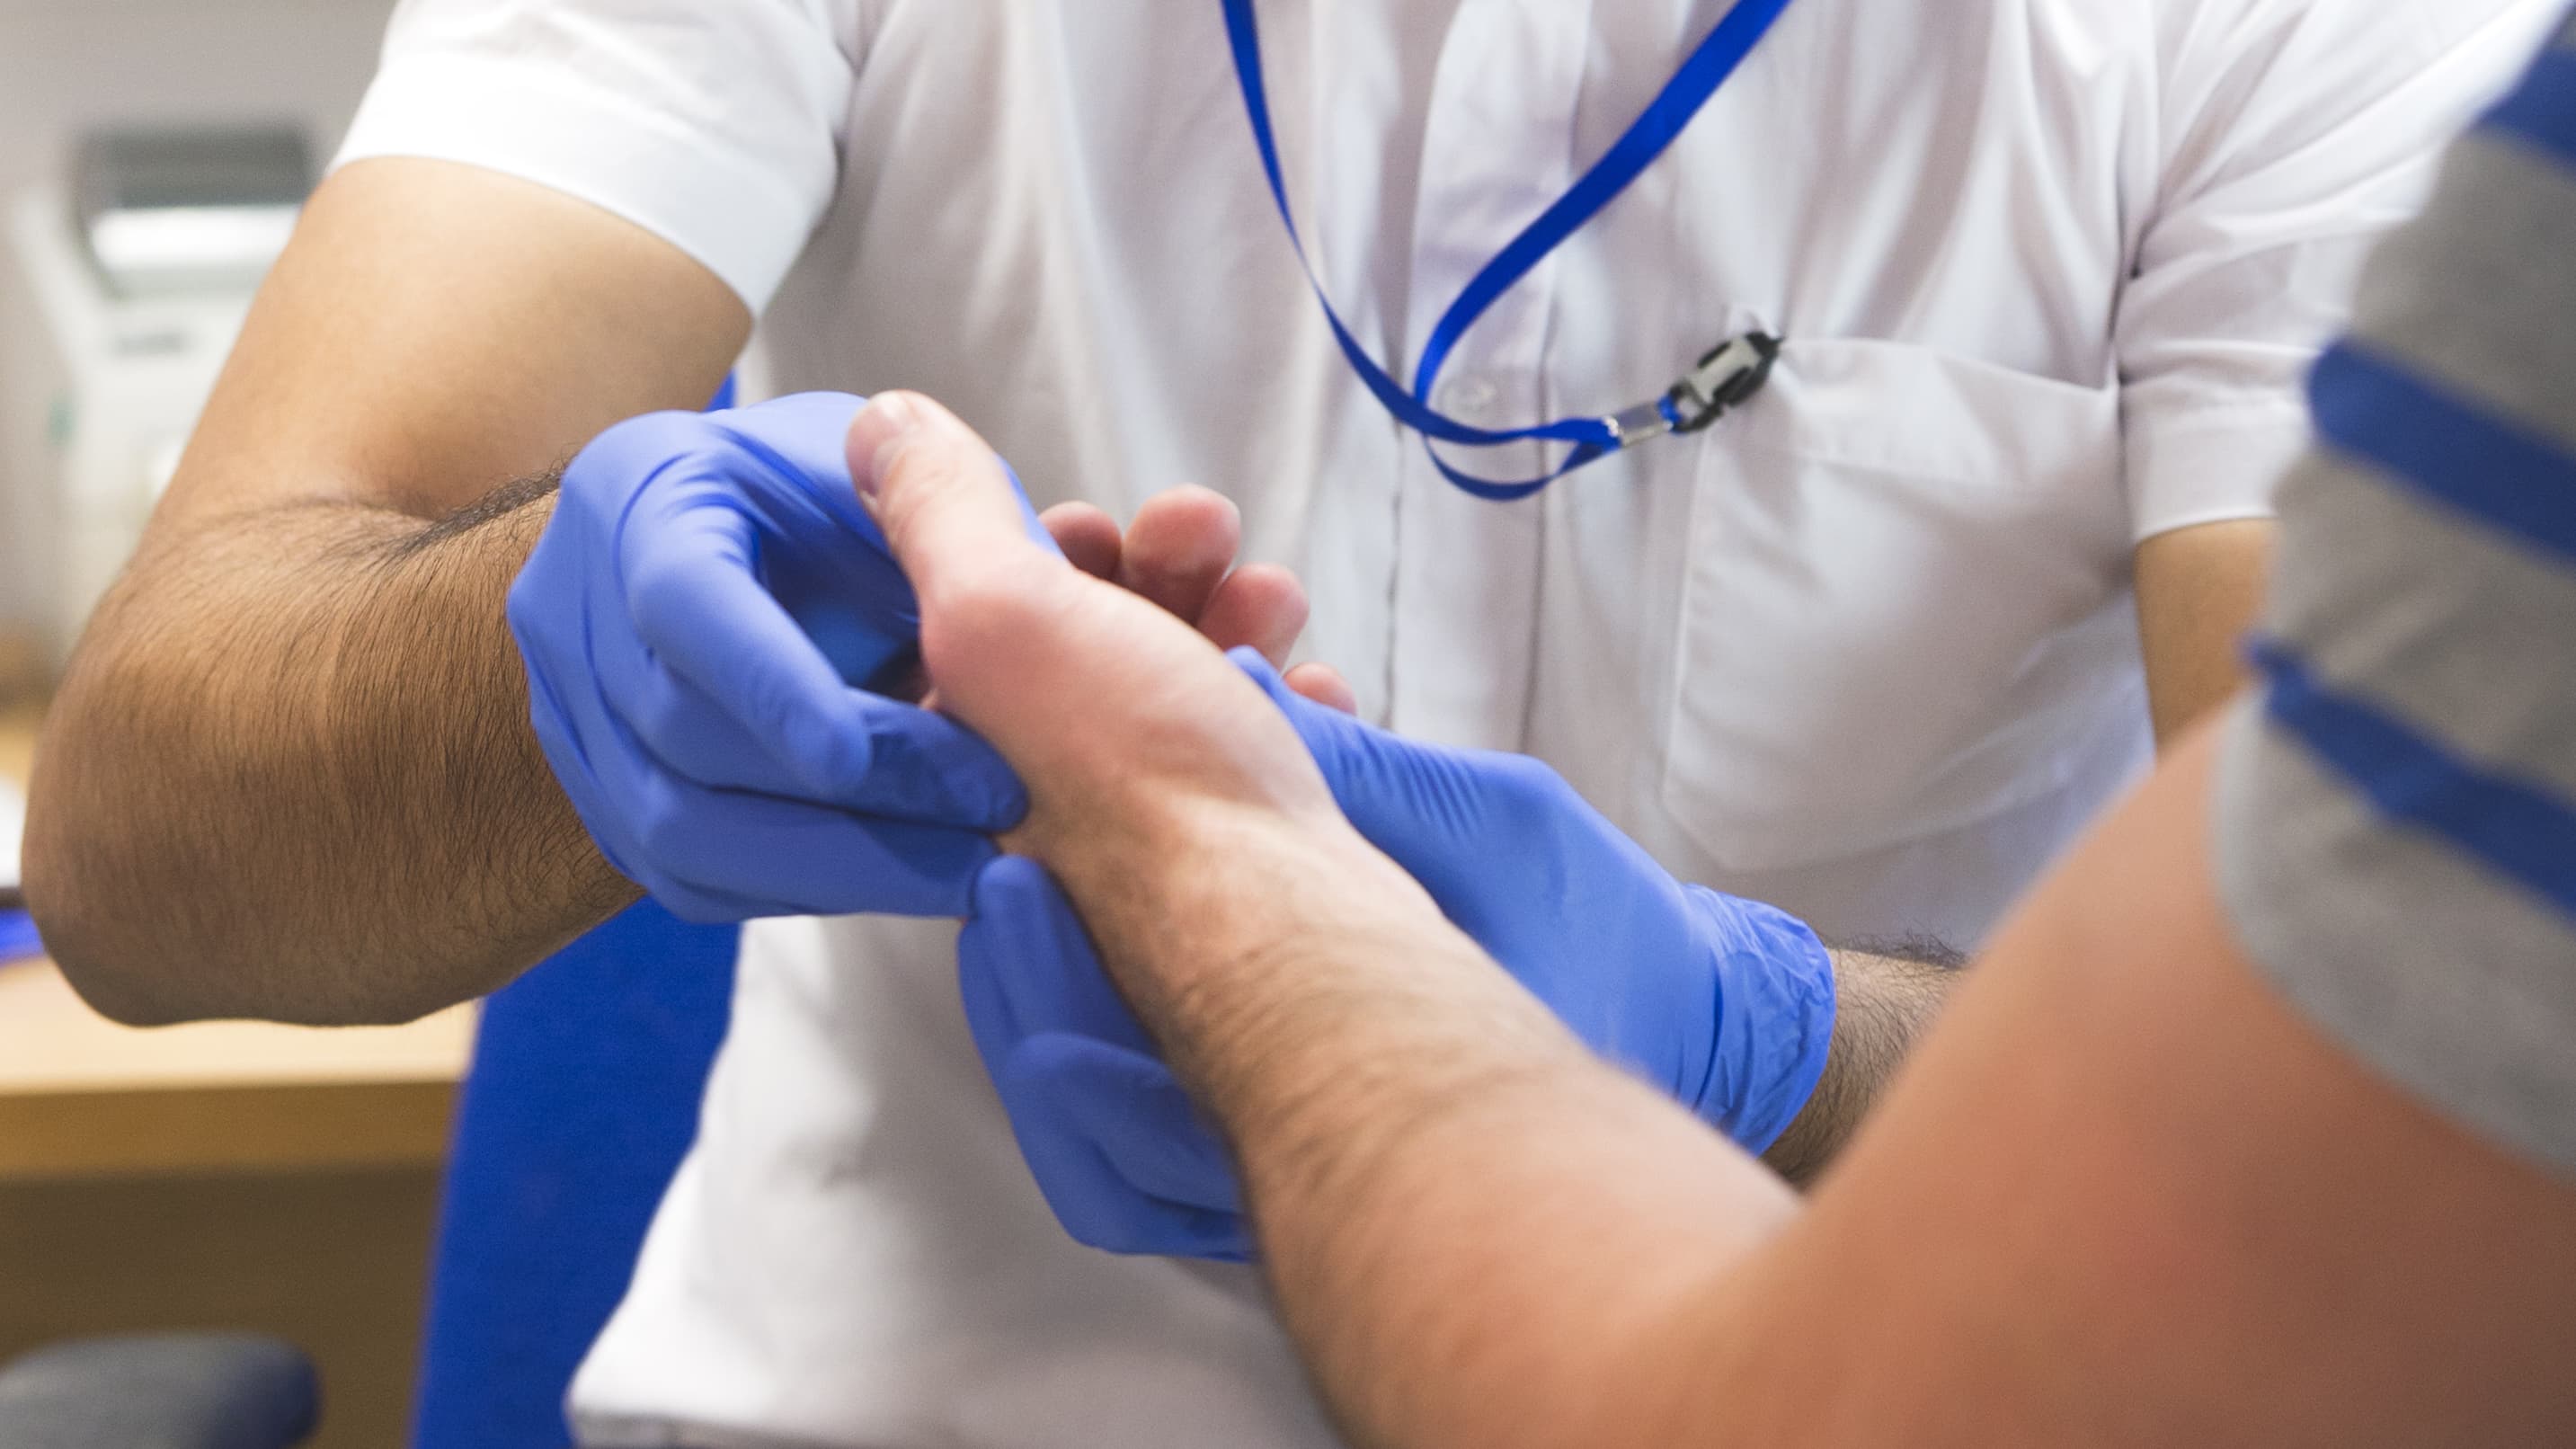 a doctor examines a possible wrist fracture